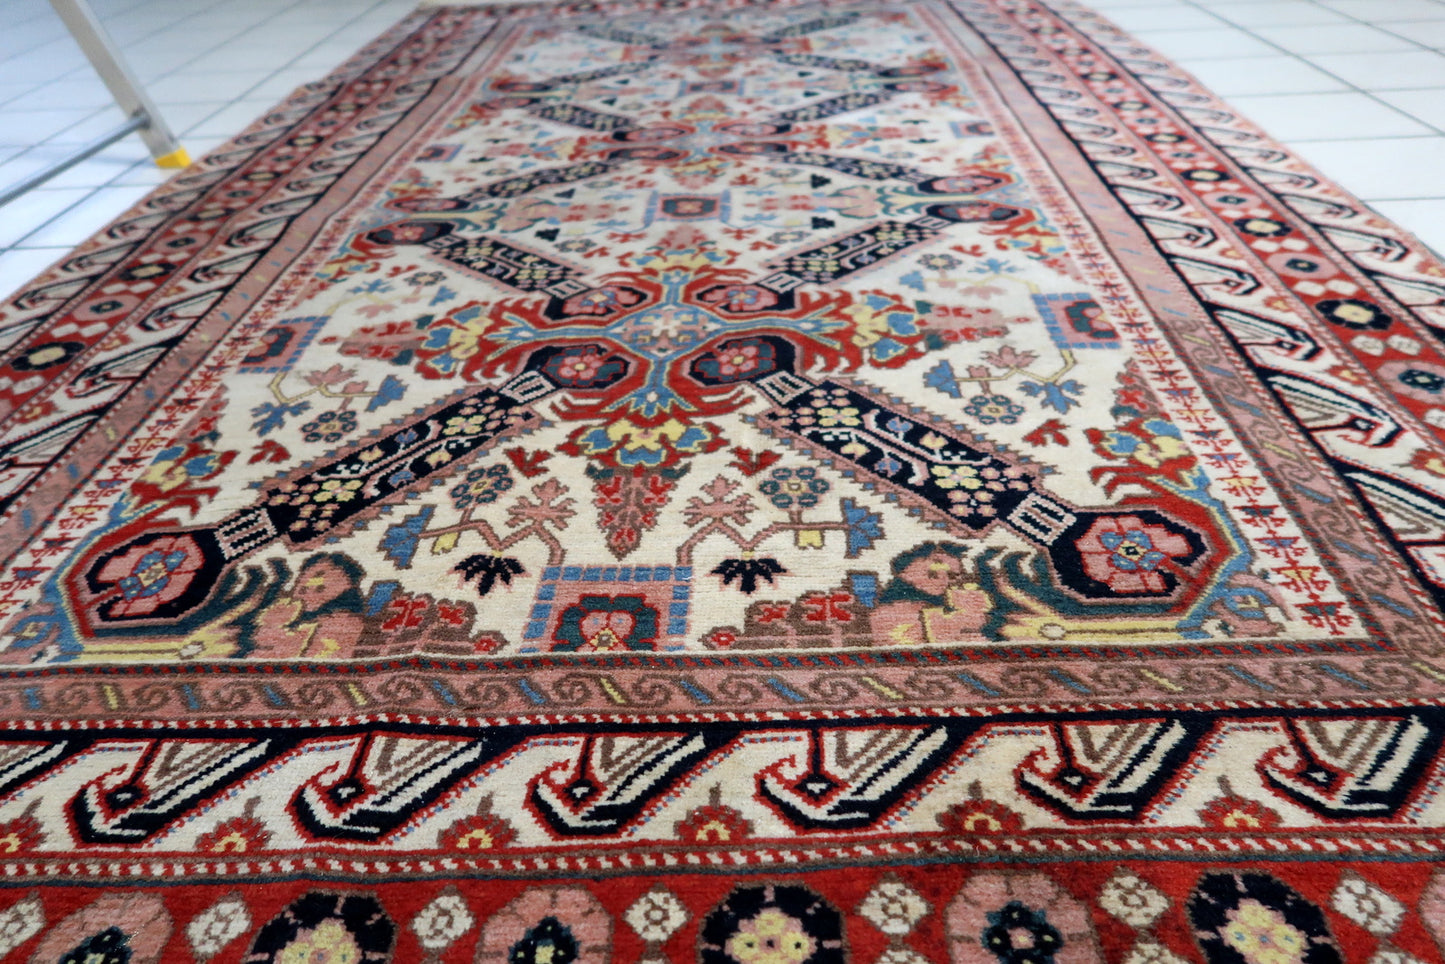 Detailed view showcasing the rug's size and dimensions (4.2' x 7.4' or 130cm x 228cm)